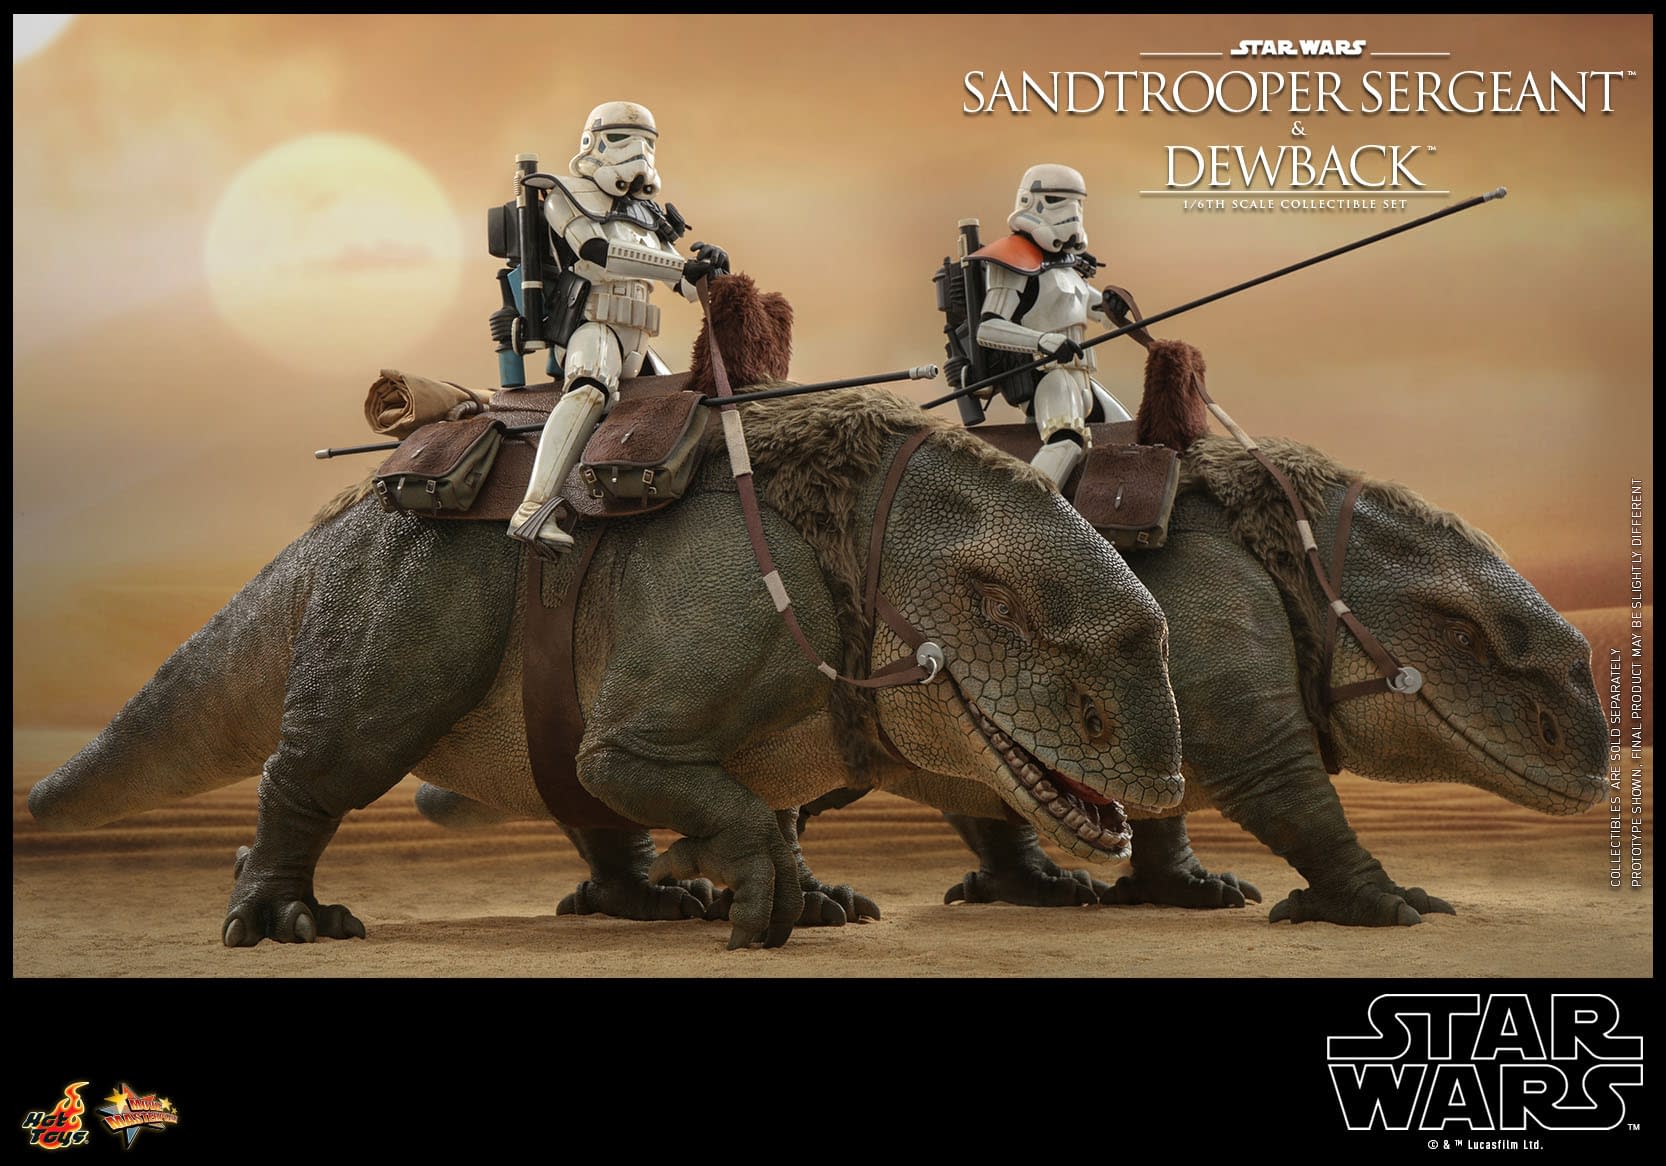 Search for Droids with Hot Toys New Star Wars Sandtrooper Figure 